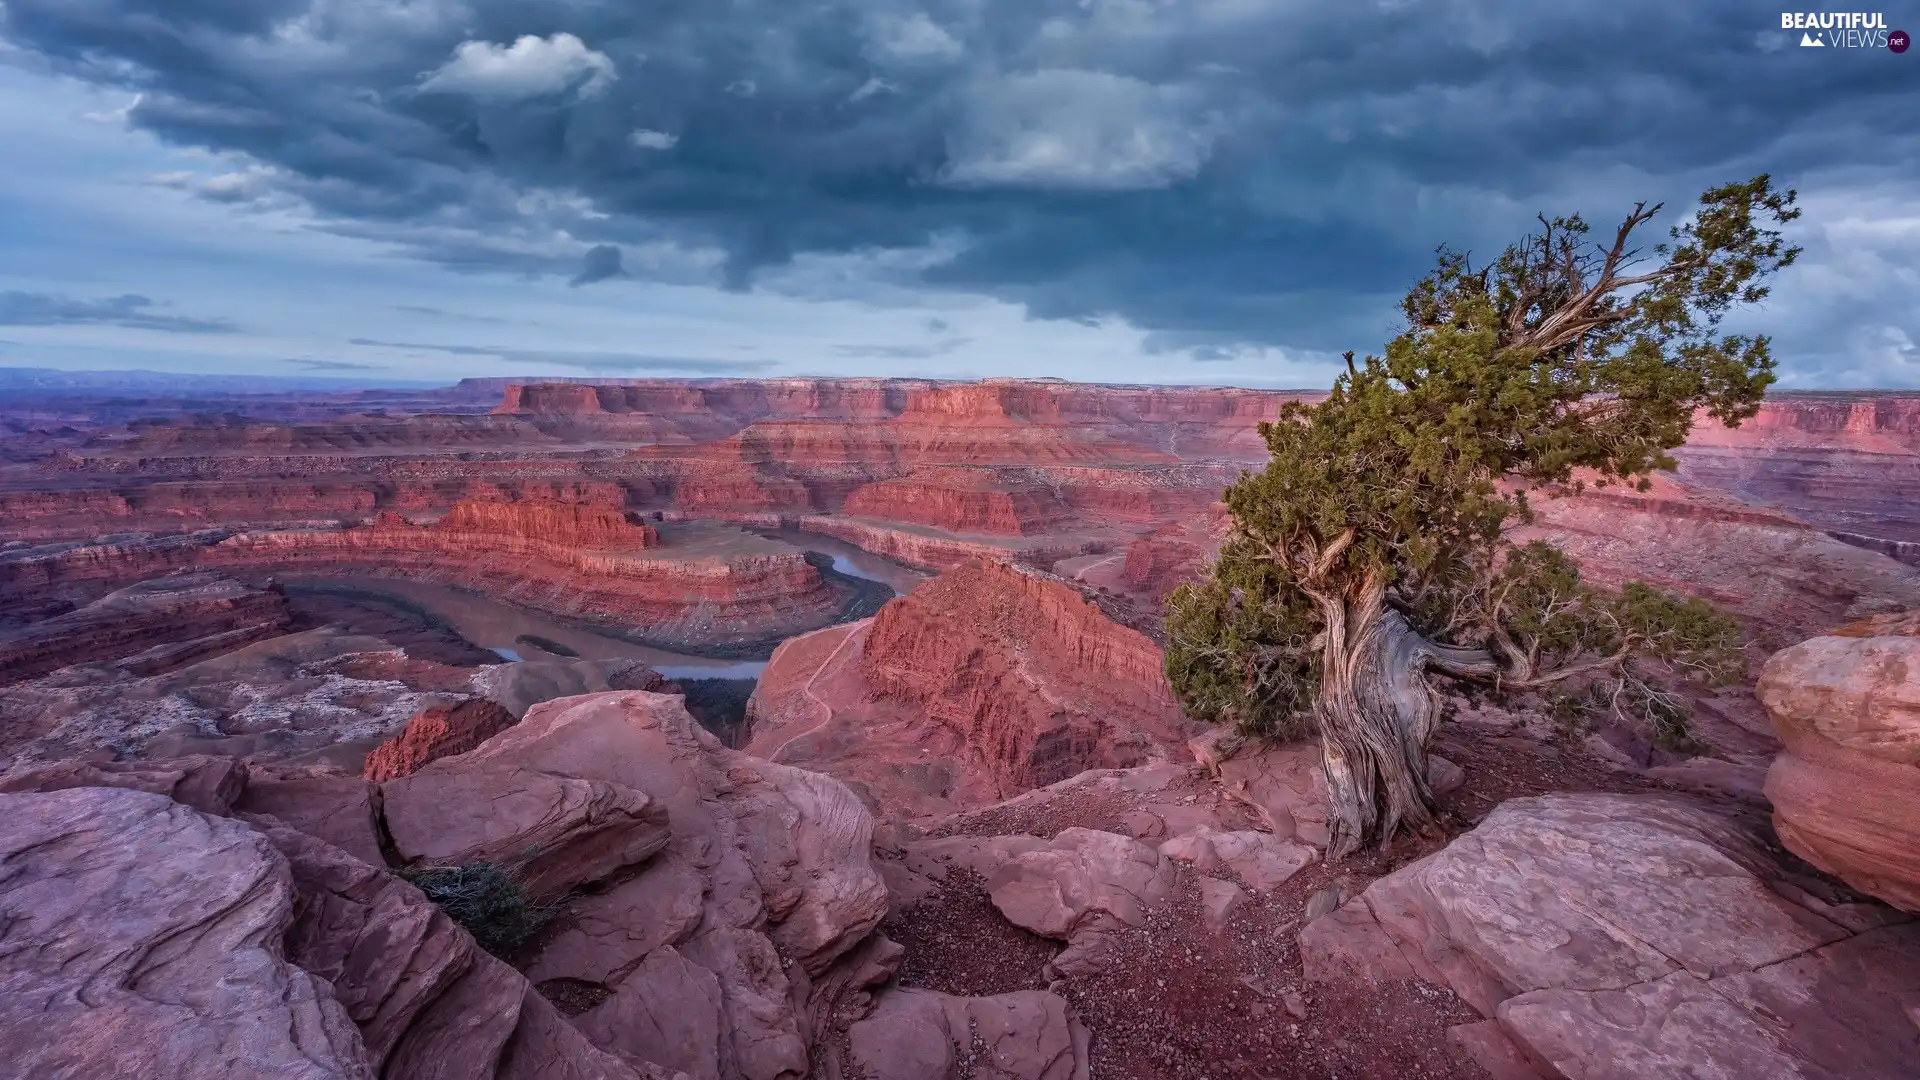 trees, The Colorado River, Utah State, The United States, State Park Dead Horse Point, rocks